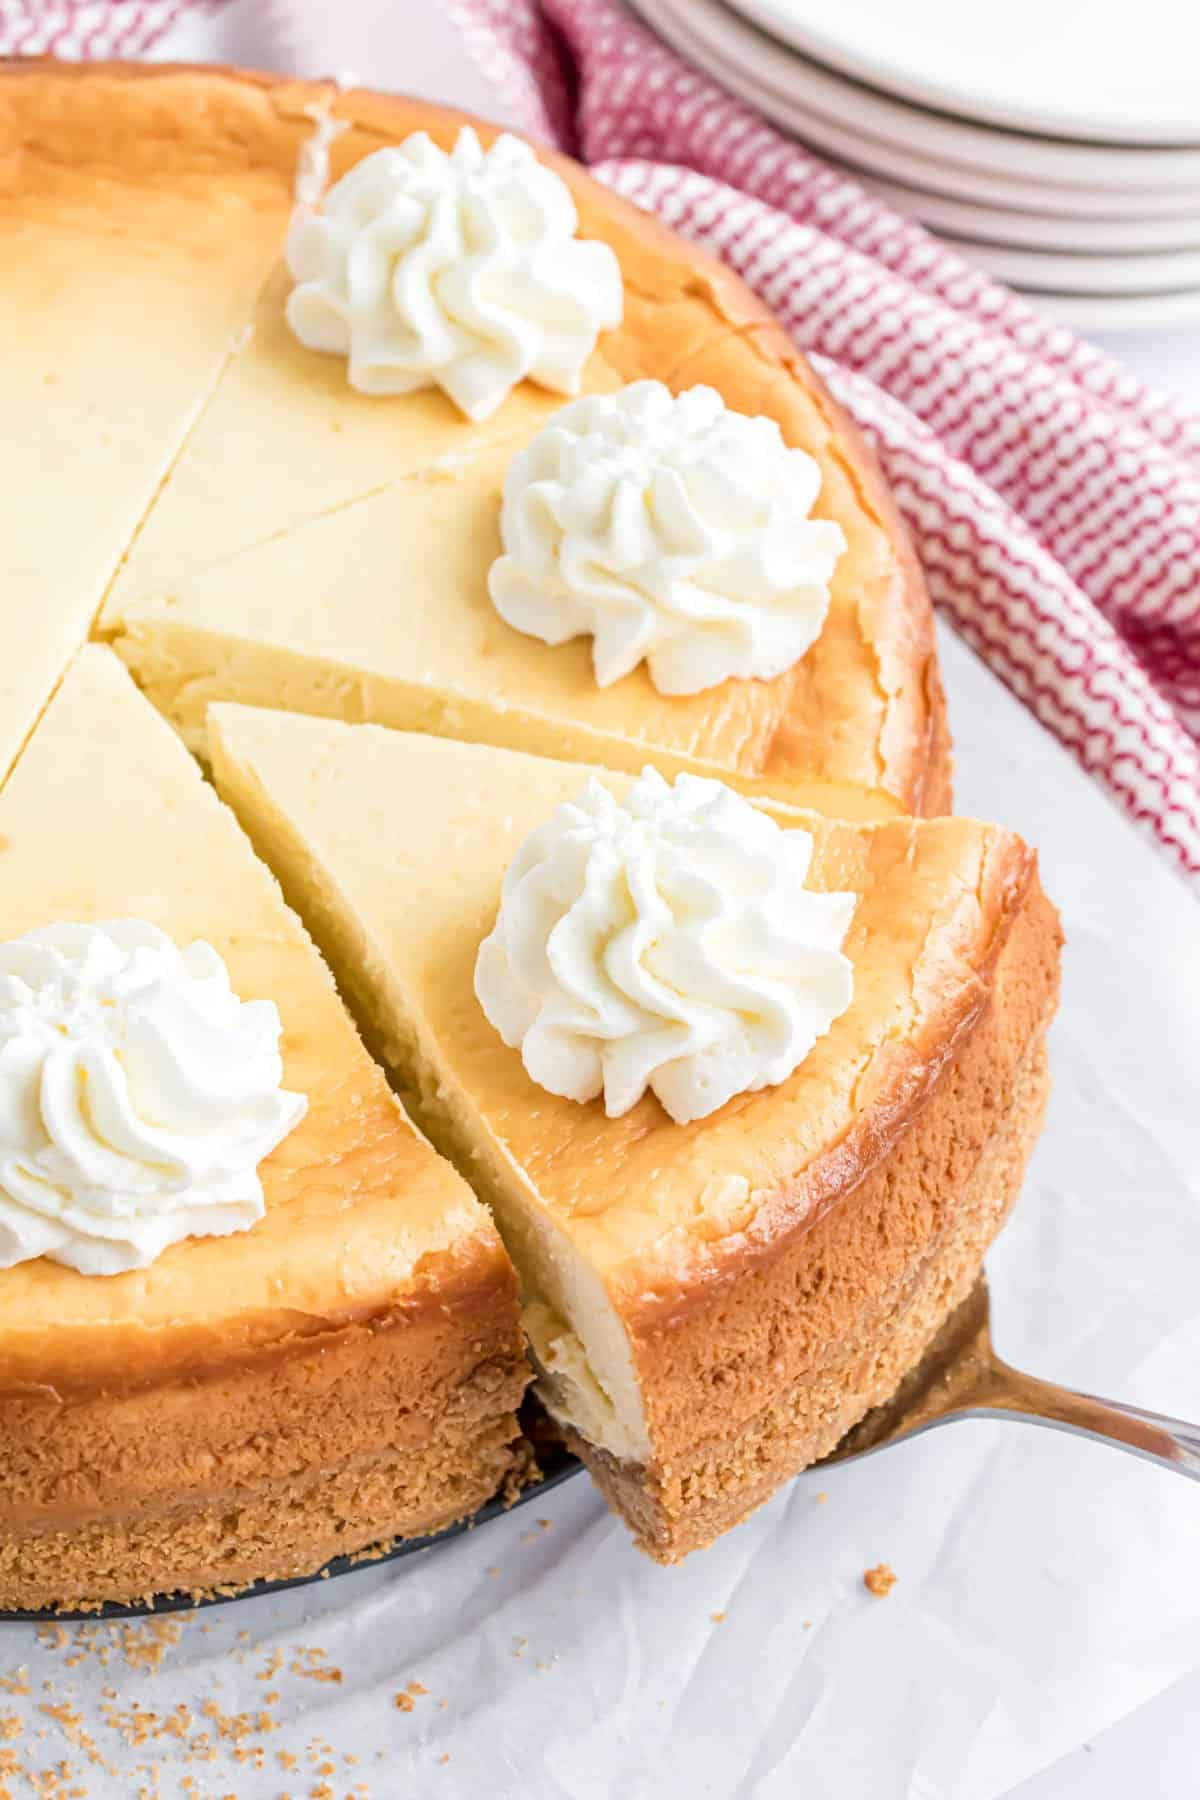 Cheesecake sliced with dollops of whipped cream on top.